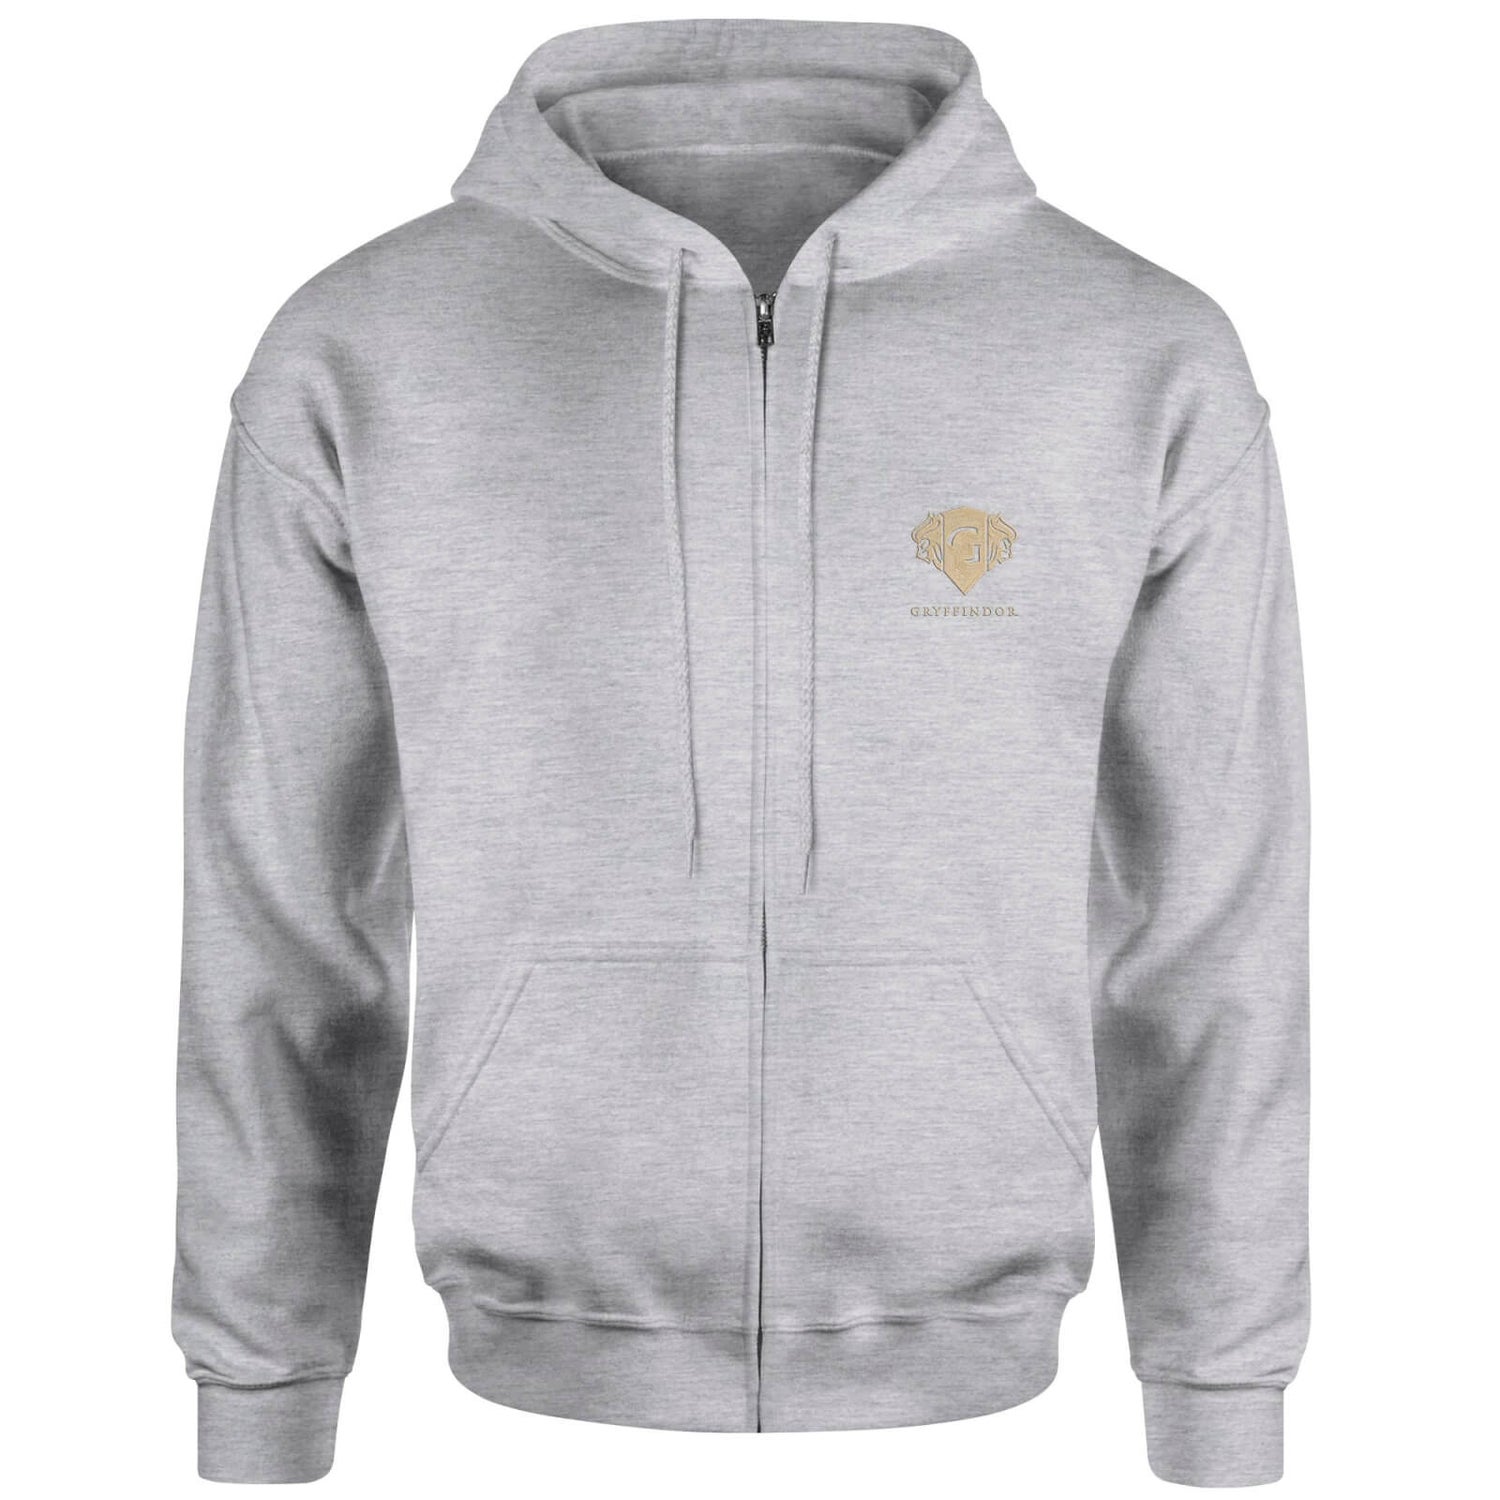 Harry Potter Gryffindor Crest Embroidered Unisex Zipped Hoodie - Grey